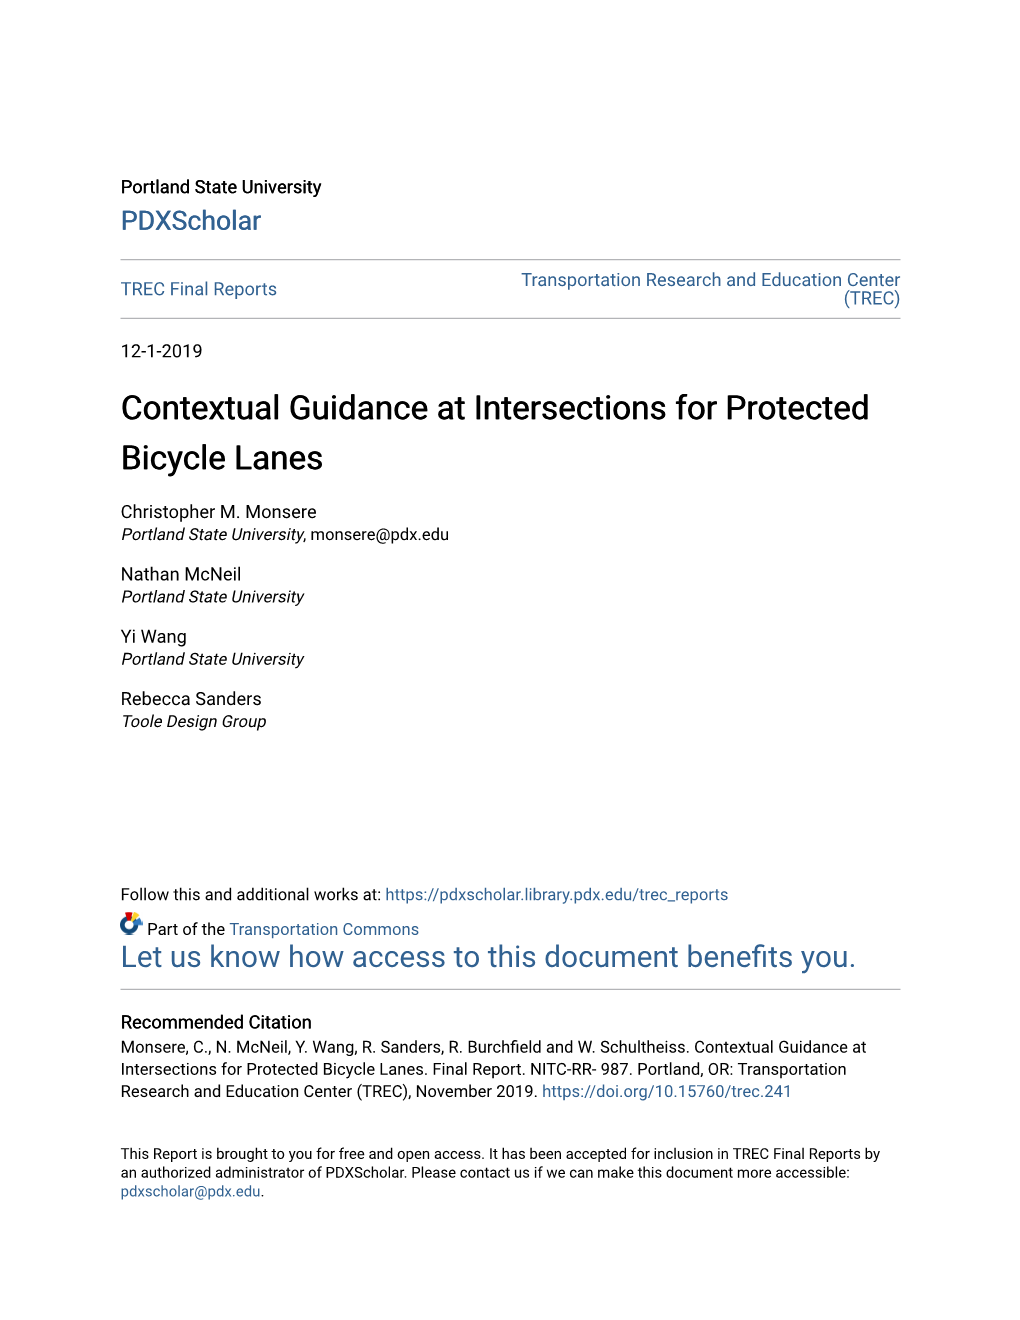 Contextual Guidance at Intersections for Protected Bicycle Lanes